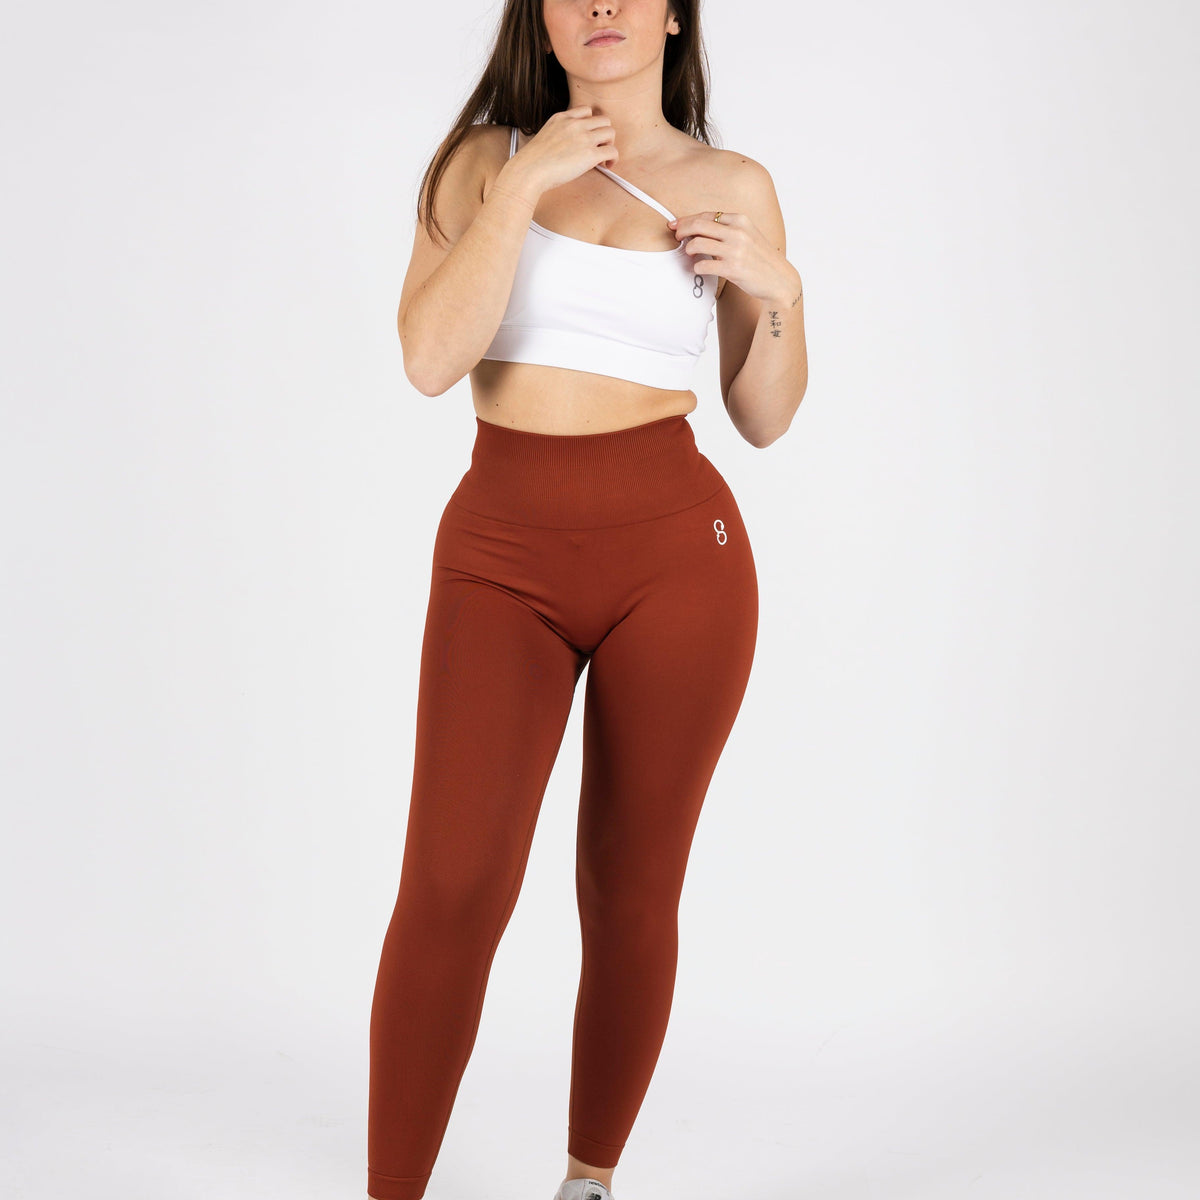 Untamed Maple Syrup Leggings – Styxgym